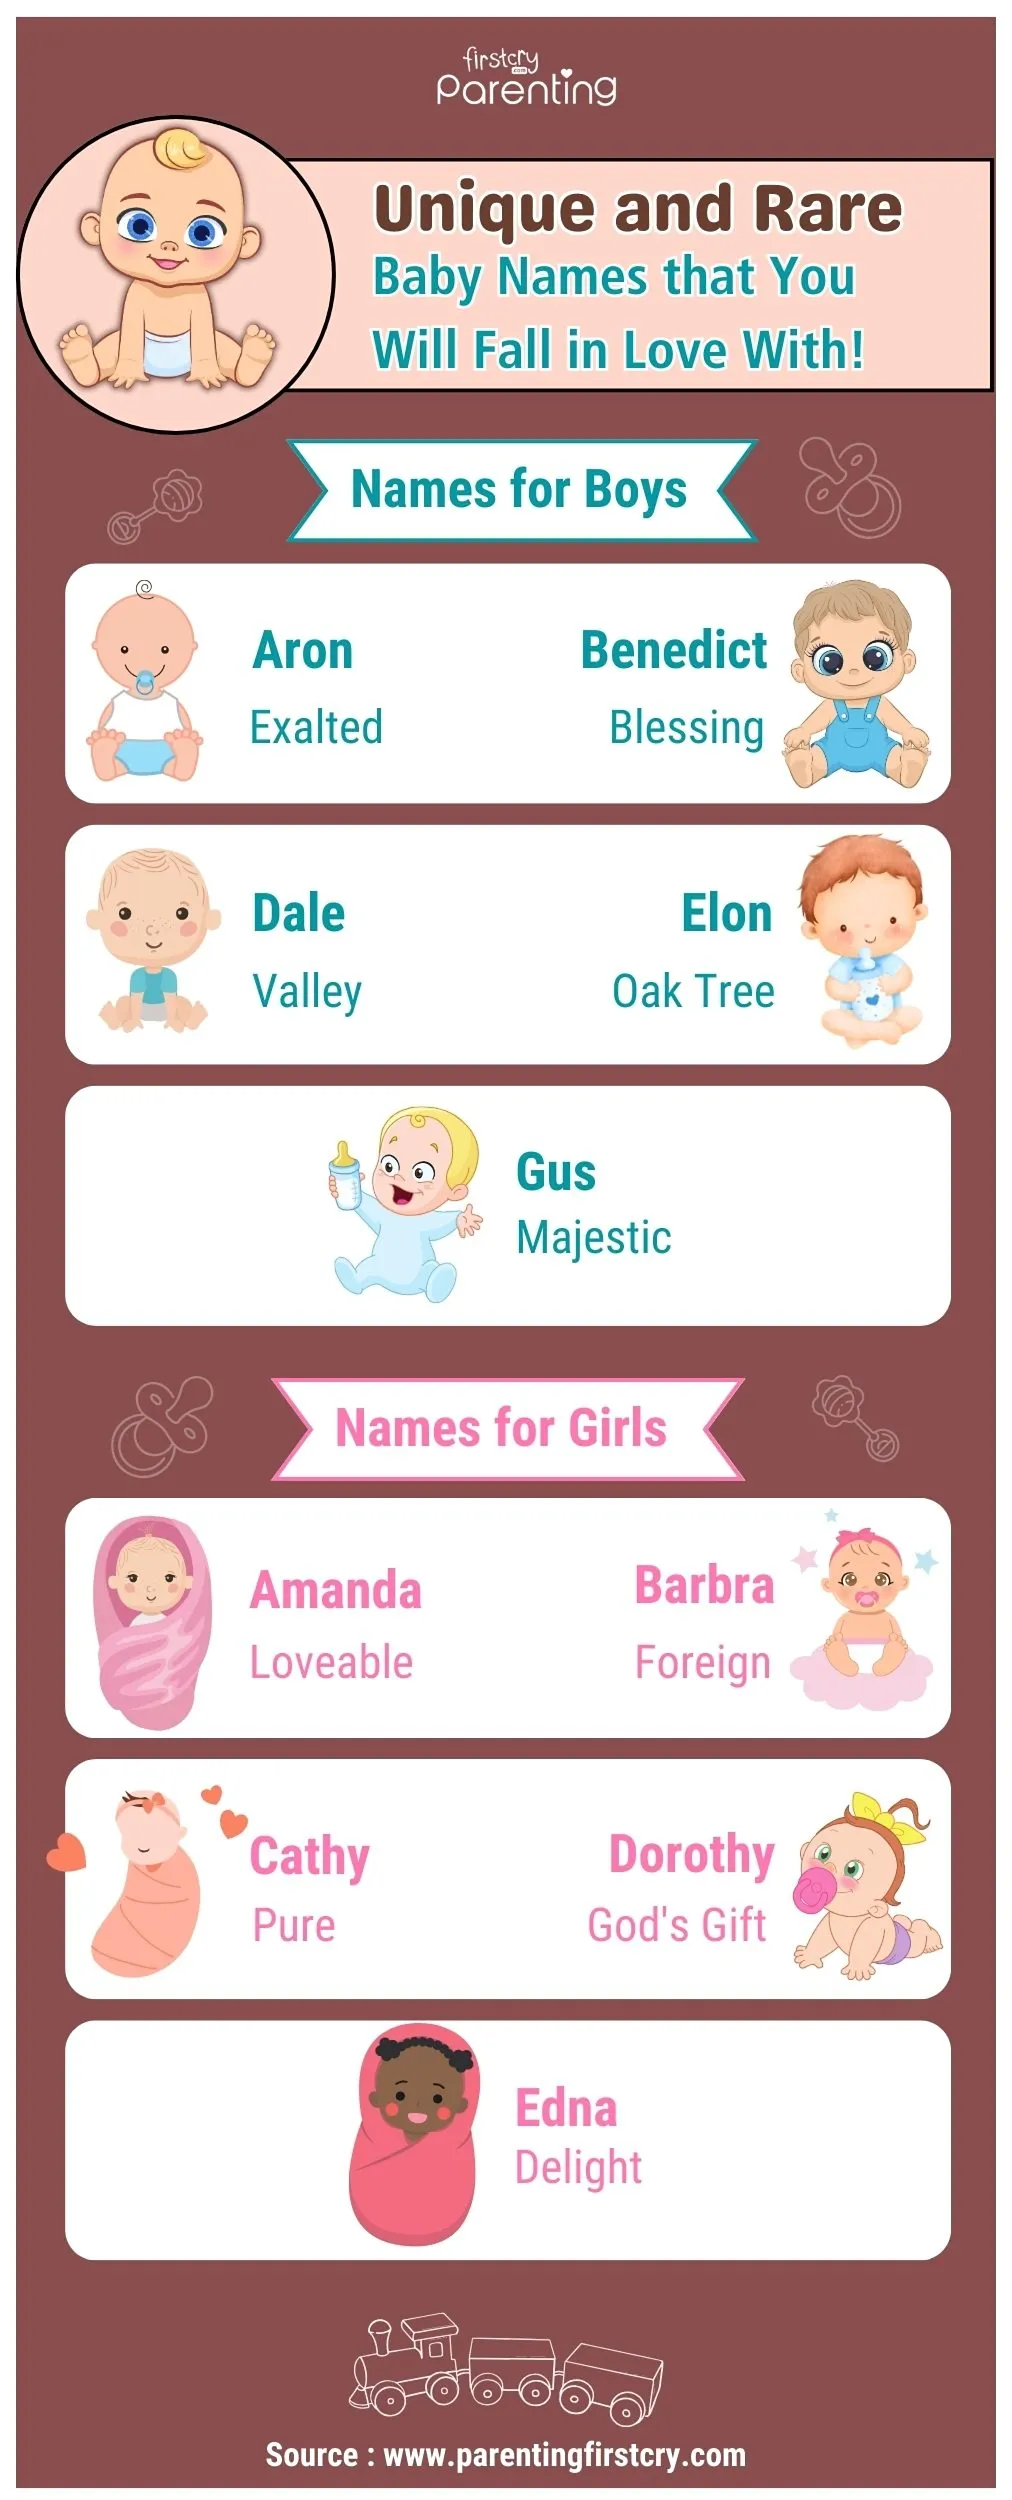 Infographic: Rare Baby Names that You Will Fall in Love With